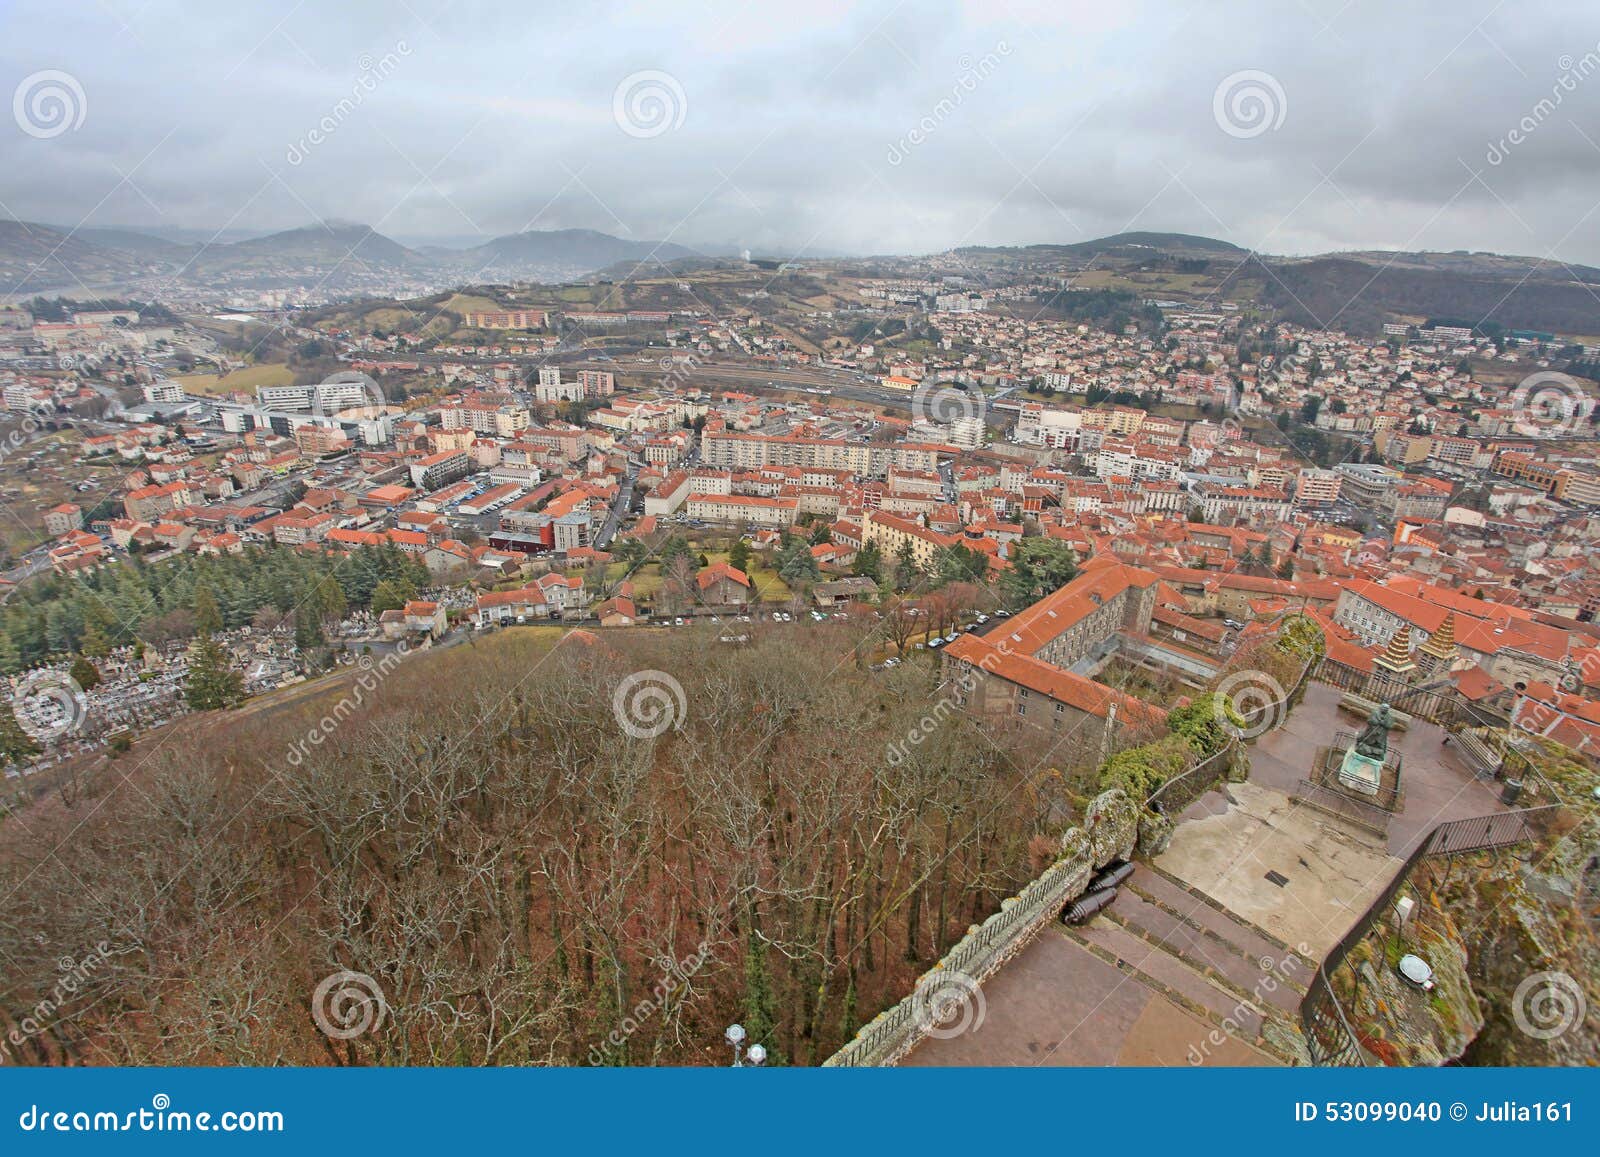 Le Puy En Velay from Above, France Editorial Image - Image of ...